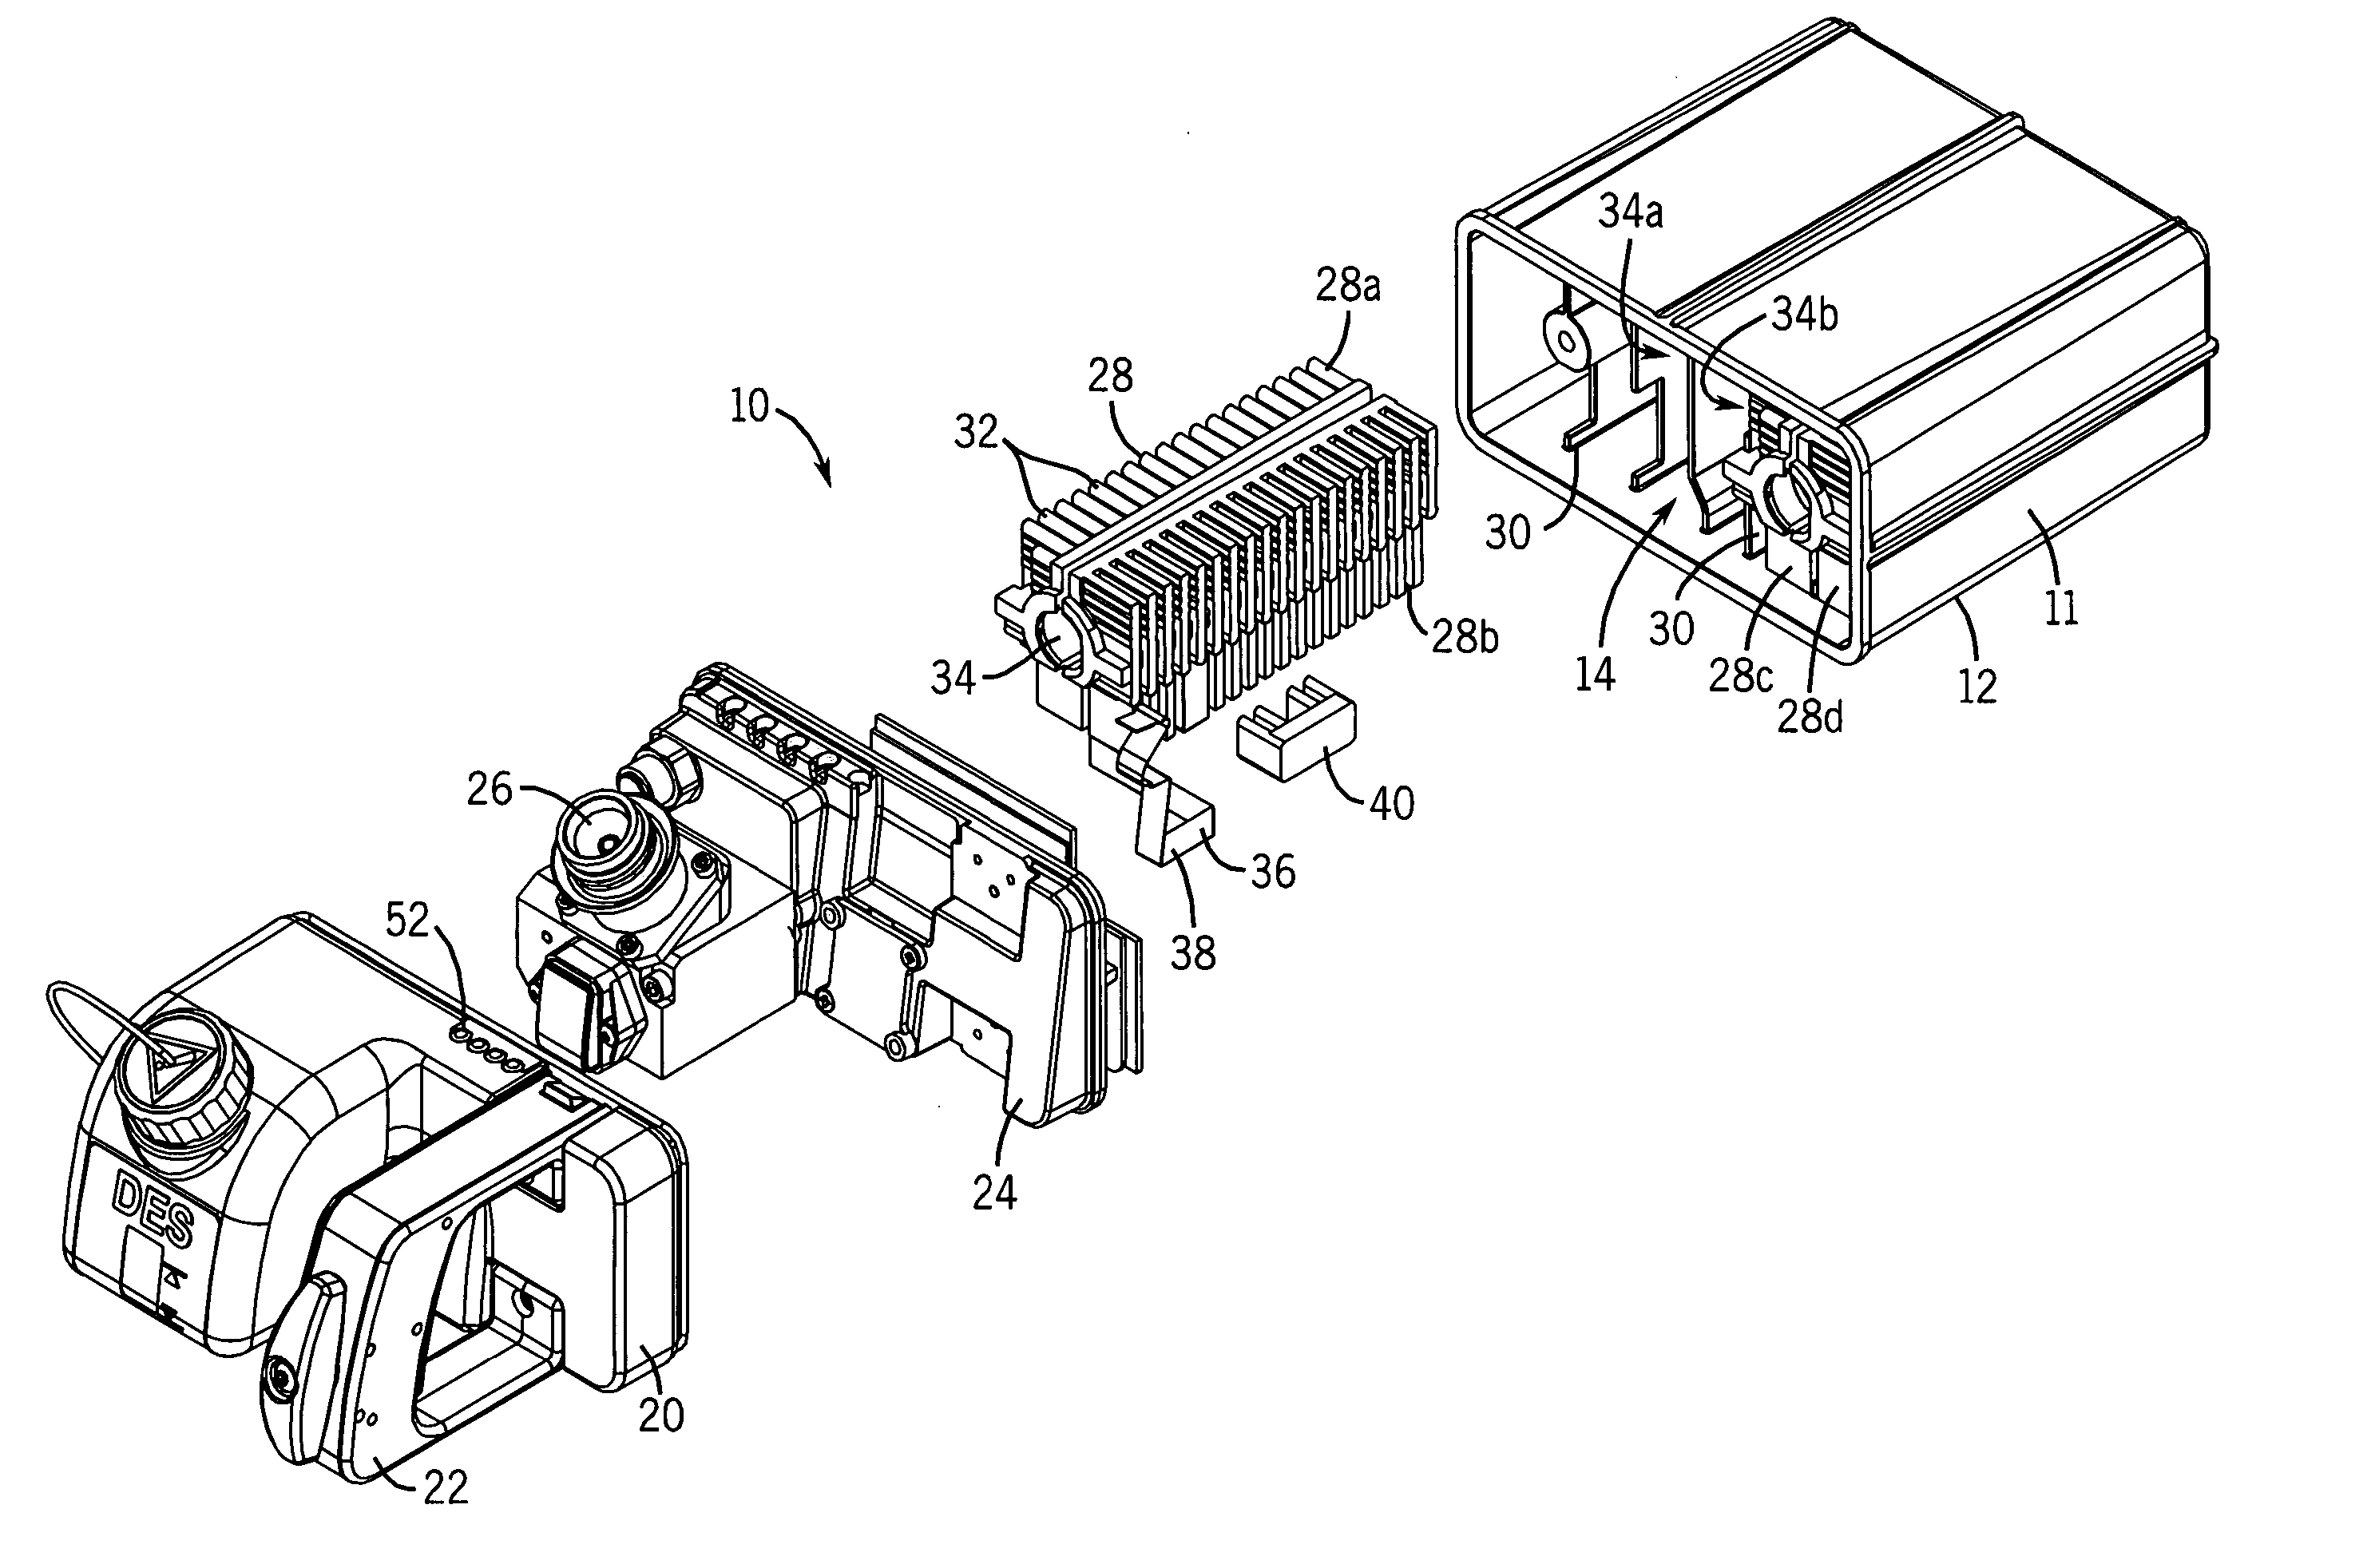 Anesthetic agent cassette for an anesthesia machine